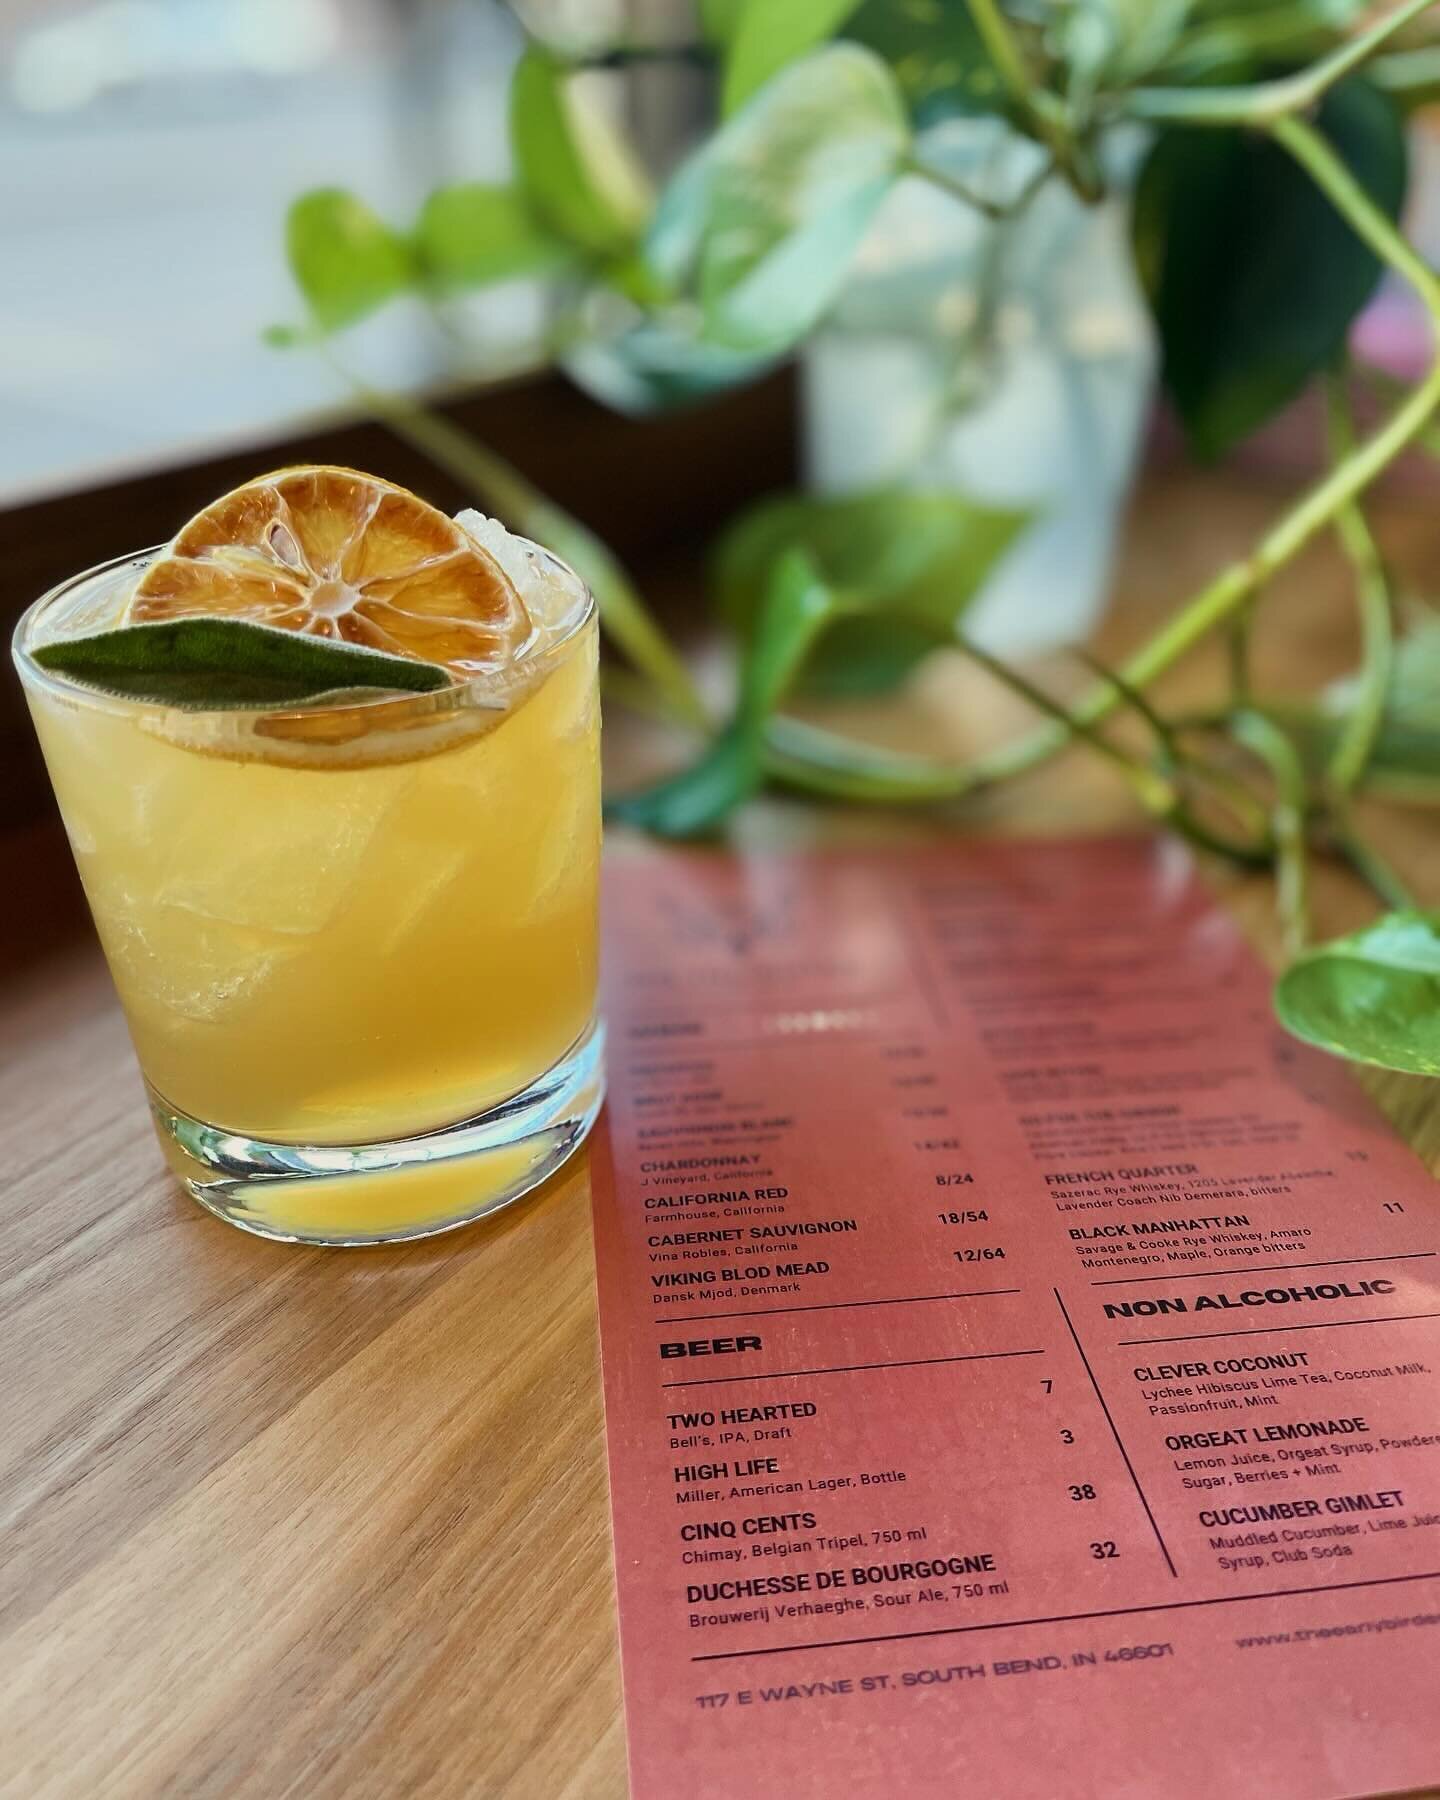 It&rsquo;s First Friday&rsquo;s @dtsouthbend! Join us for a drink and a snack before you head over to the festivities! Open 5pm-9pm tonight!

#dtsouthbend #firstfridays #goodfood #deliciousdrinks #nightmoves #moonlighter